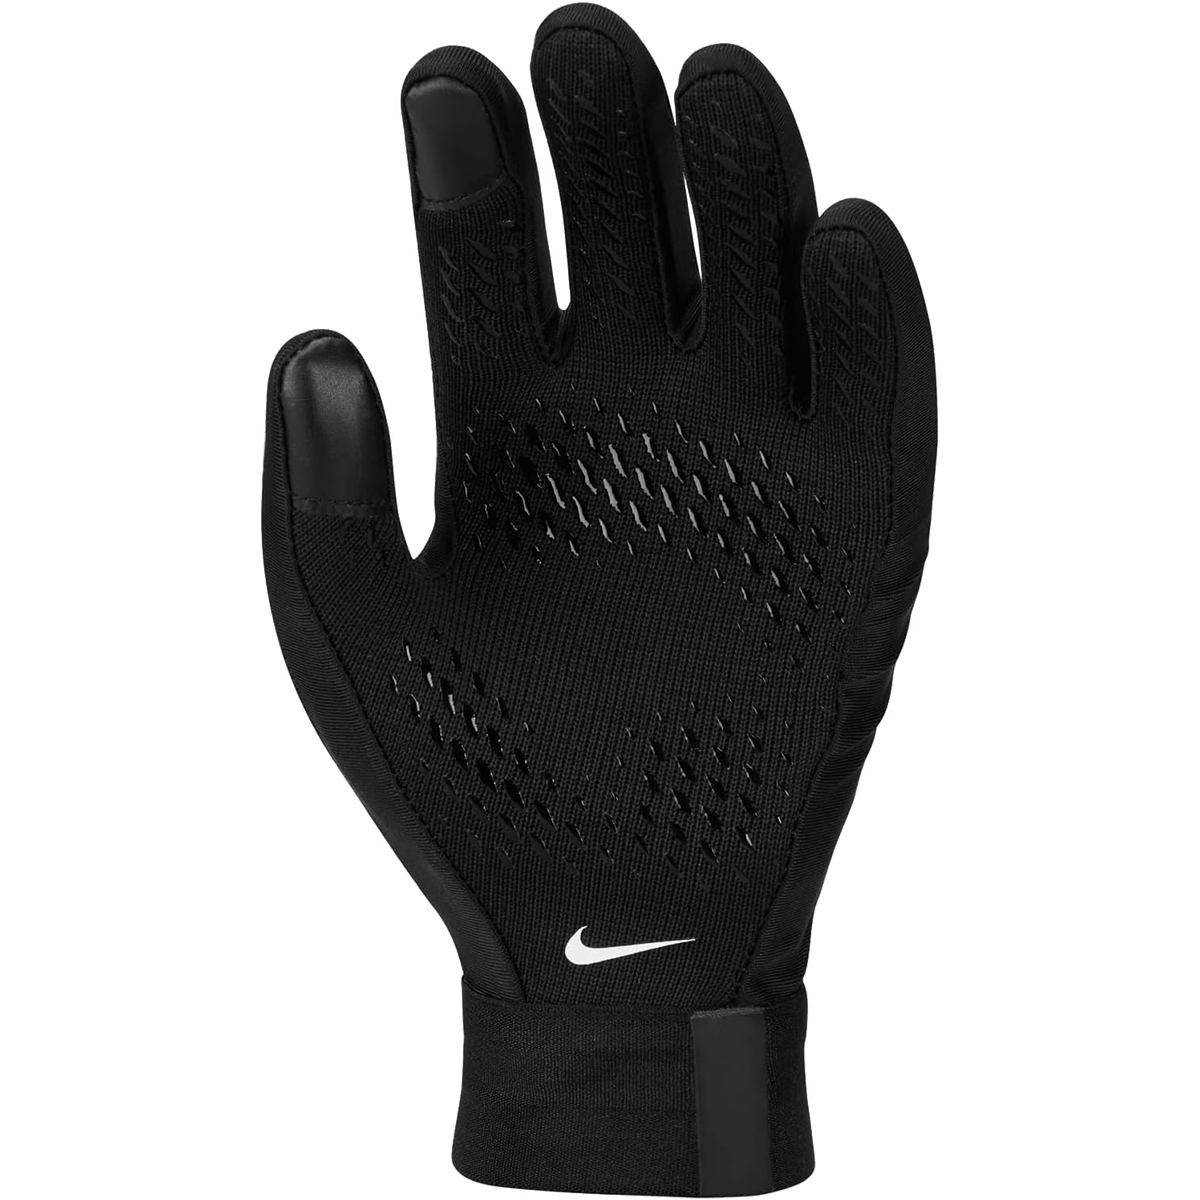 Gants Academy Therma-Fit Nike Adulte